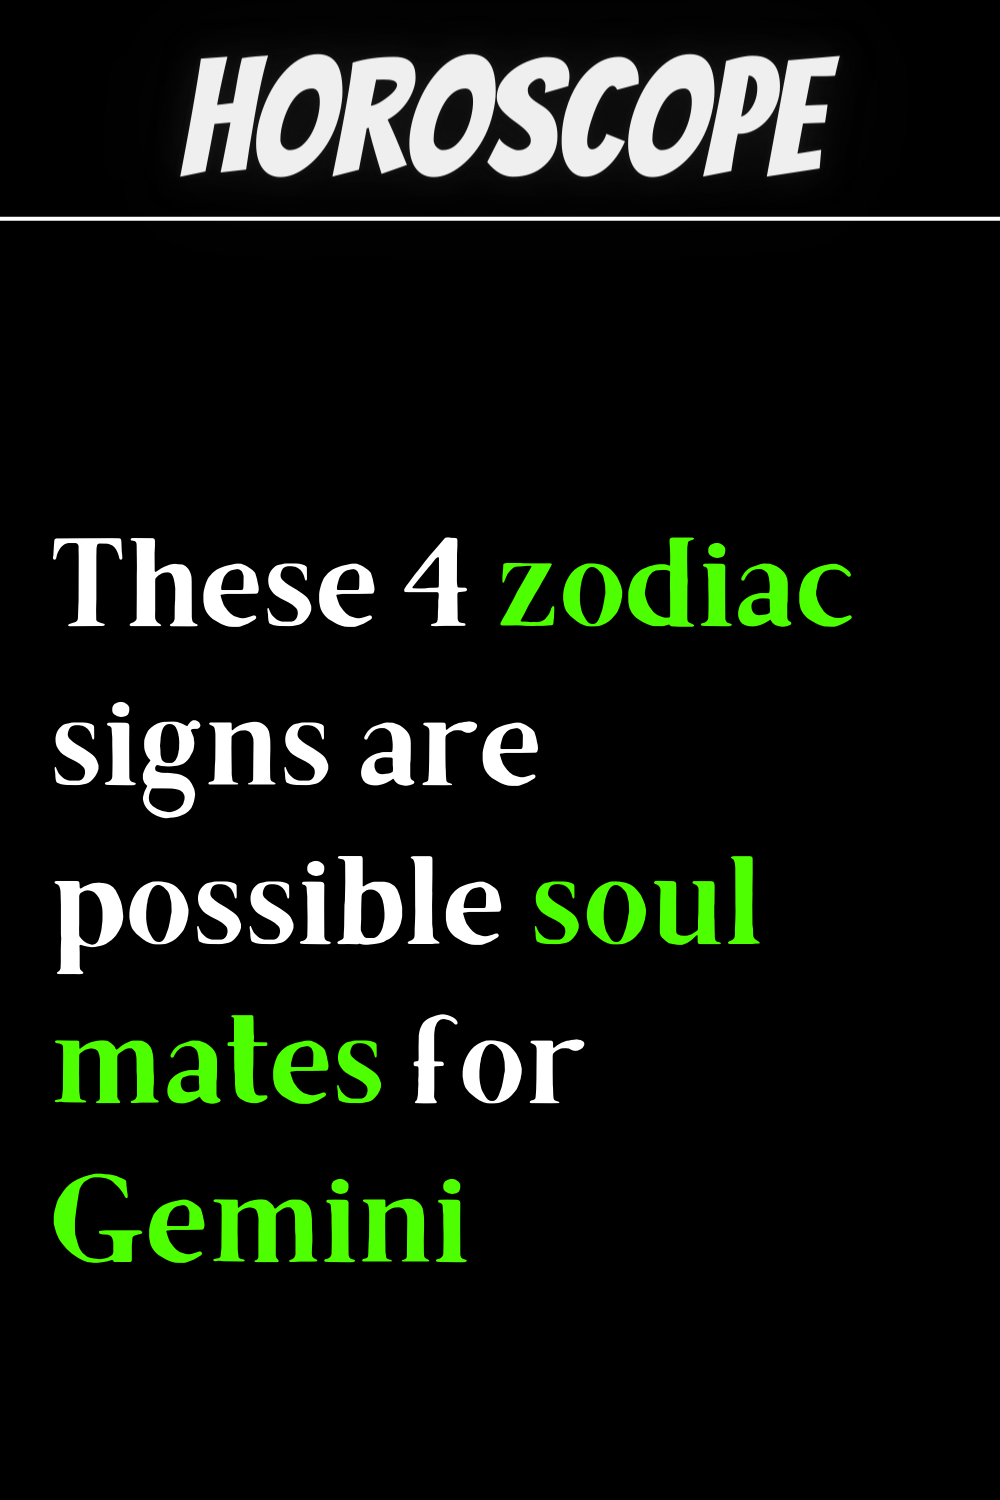 These 4 zodiac signs are possible soul mates for Gemini